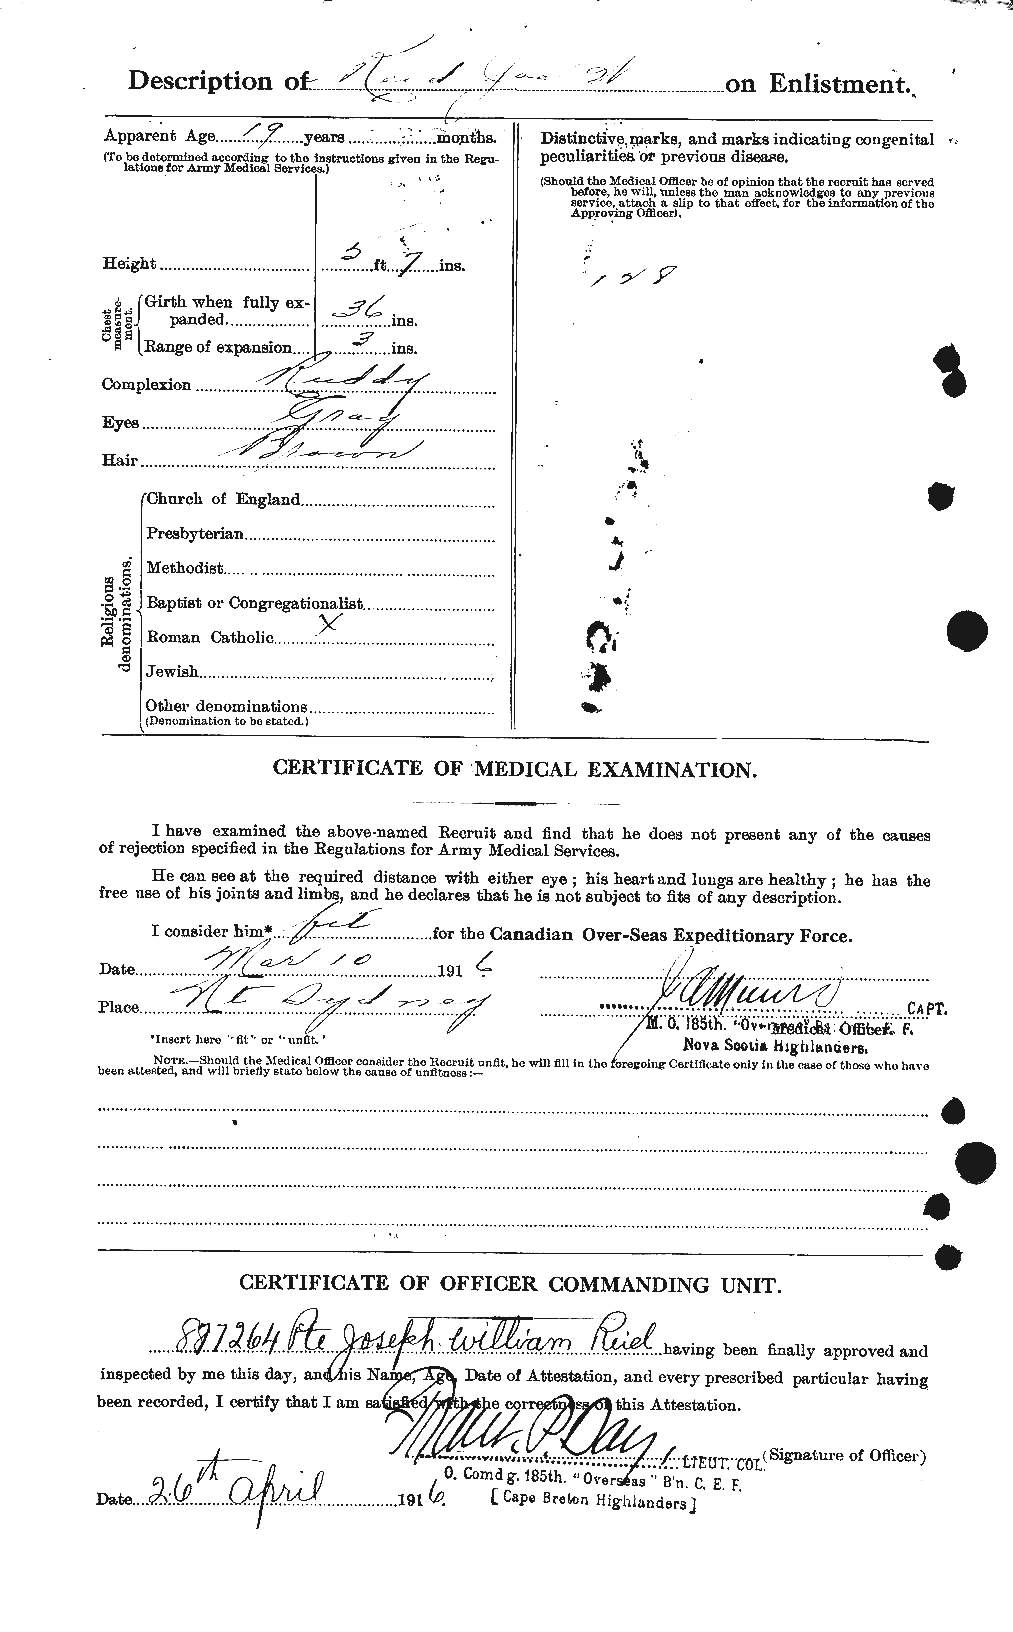 Personnel Records of the First World War - CEF 598904b